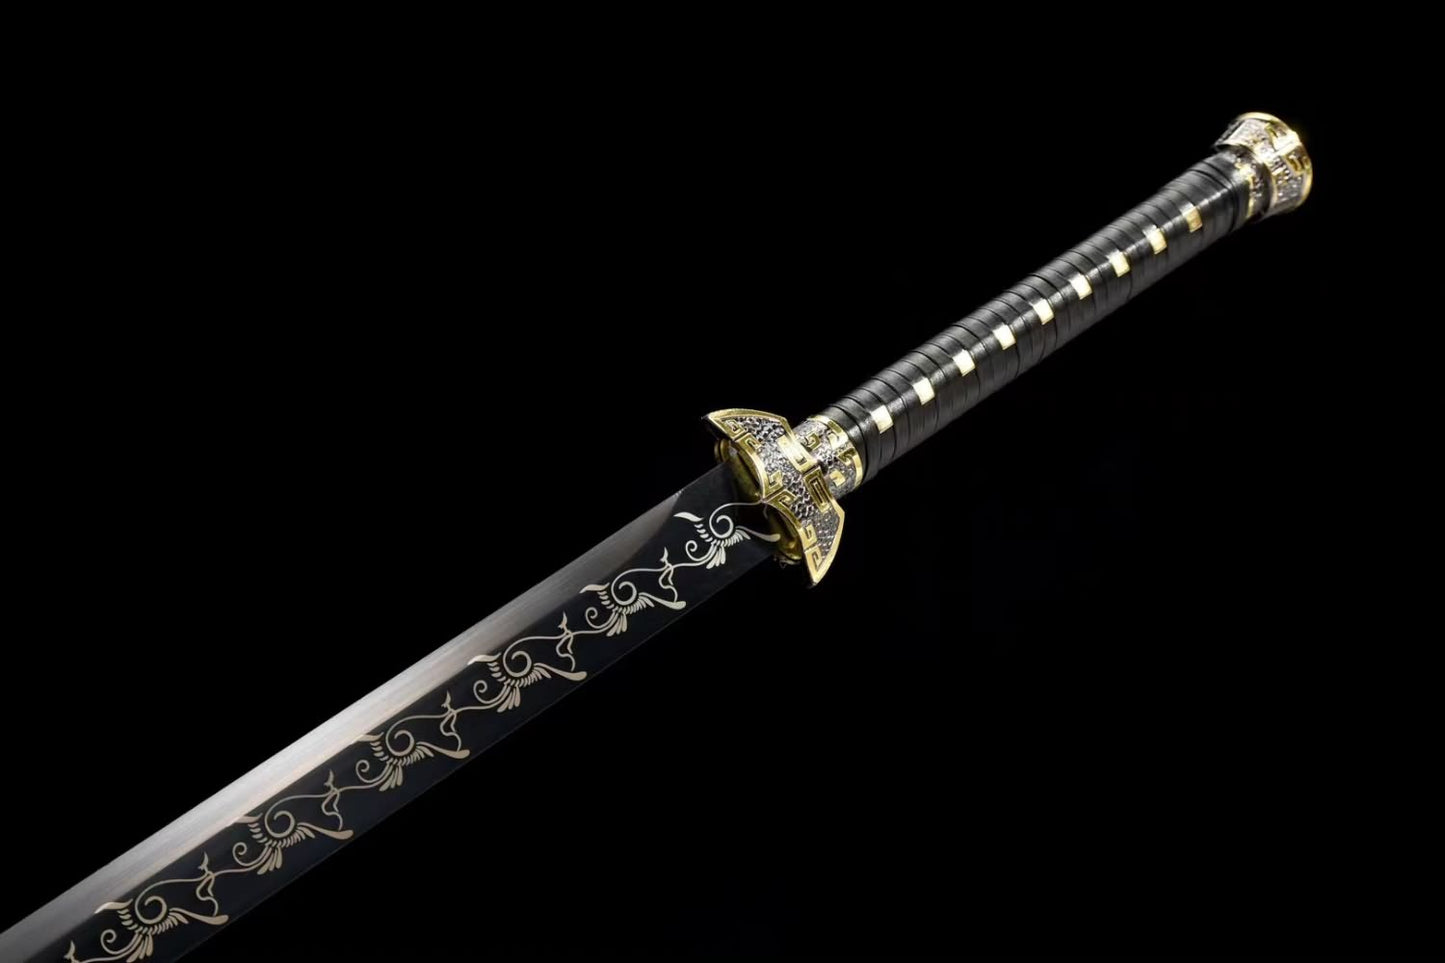 Black Gold Ancient Swords-Handcrafted High Carbon Steel Blade with Alloy Fittings and Real Wood Wrapped Faux Leather Scabbard